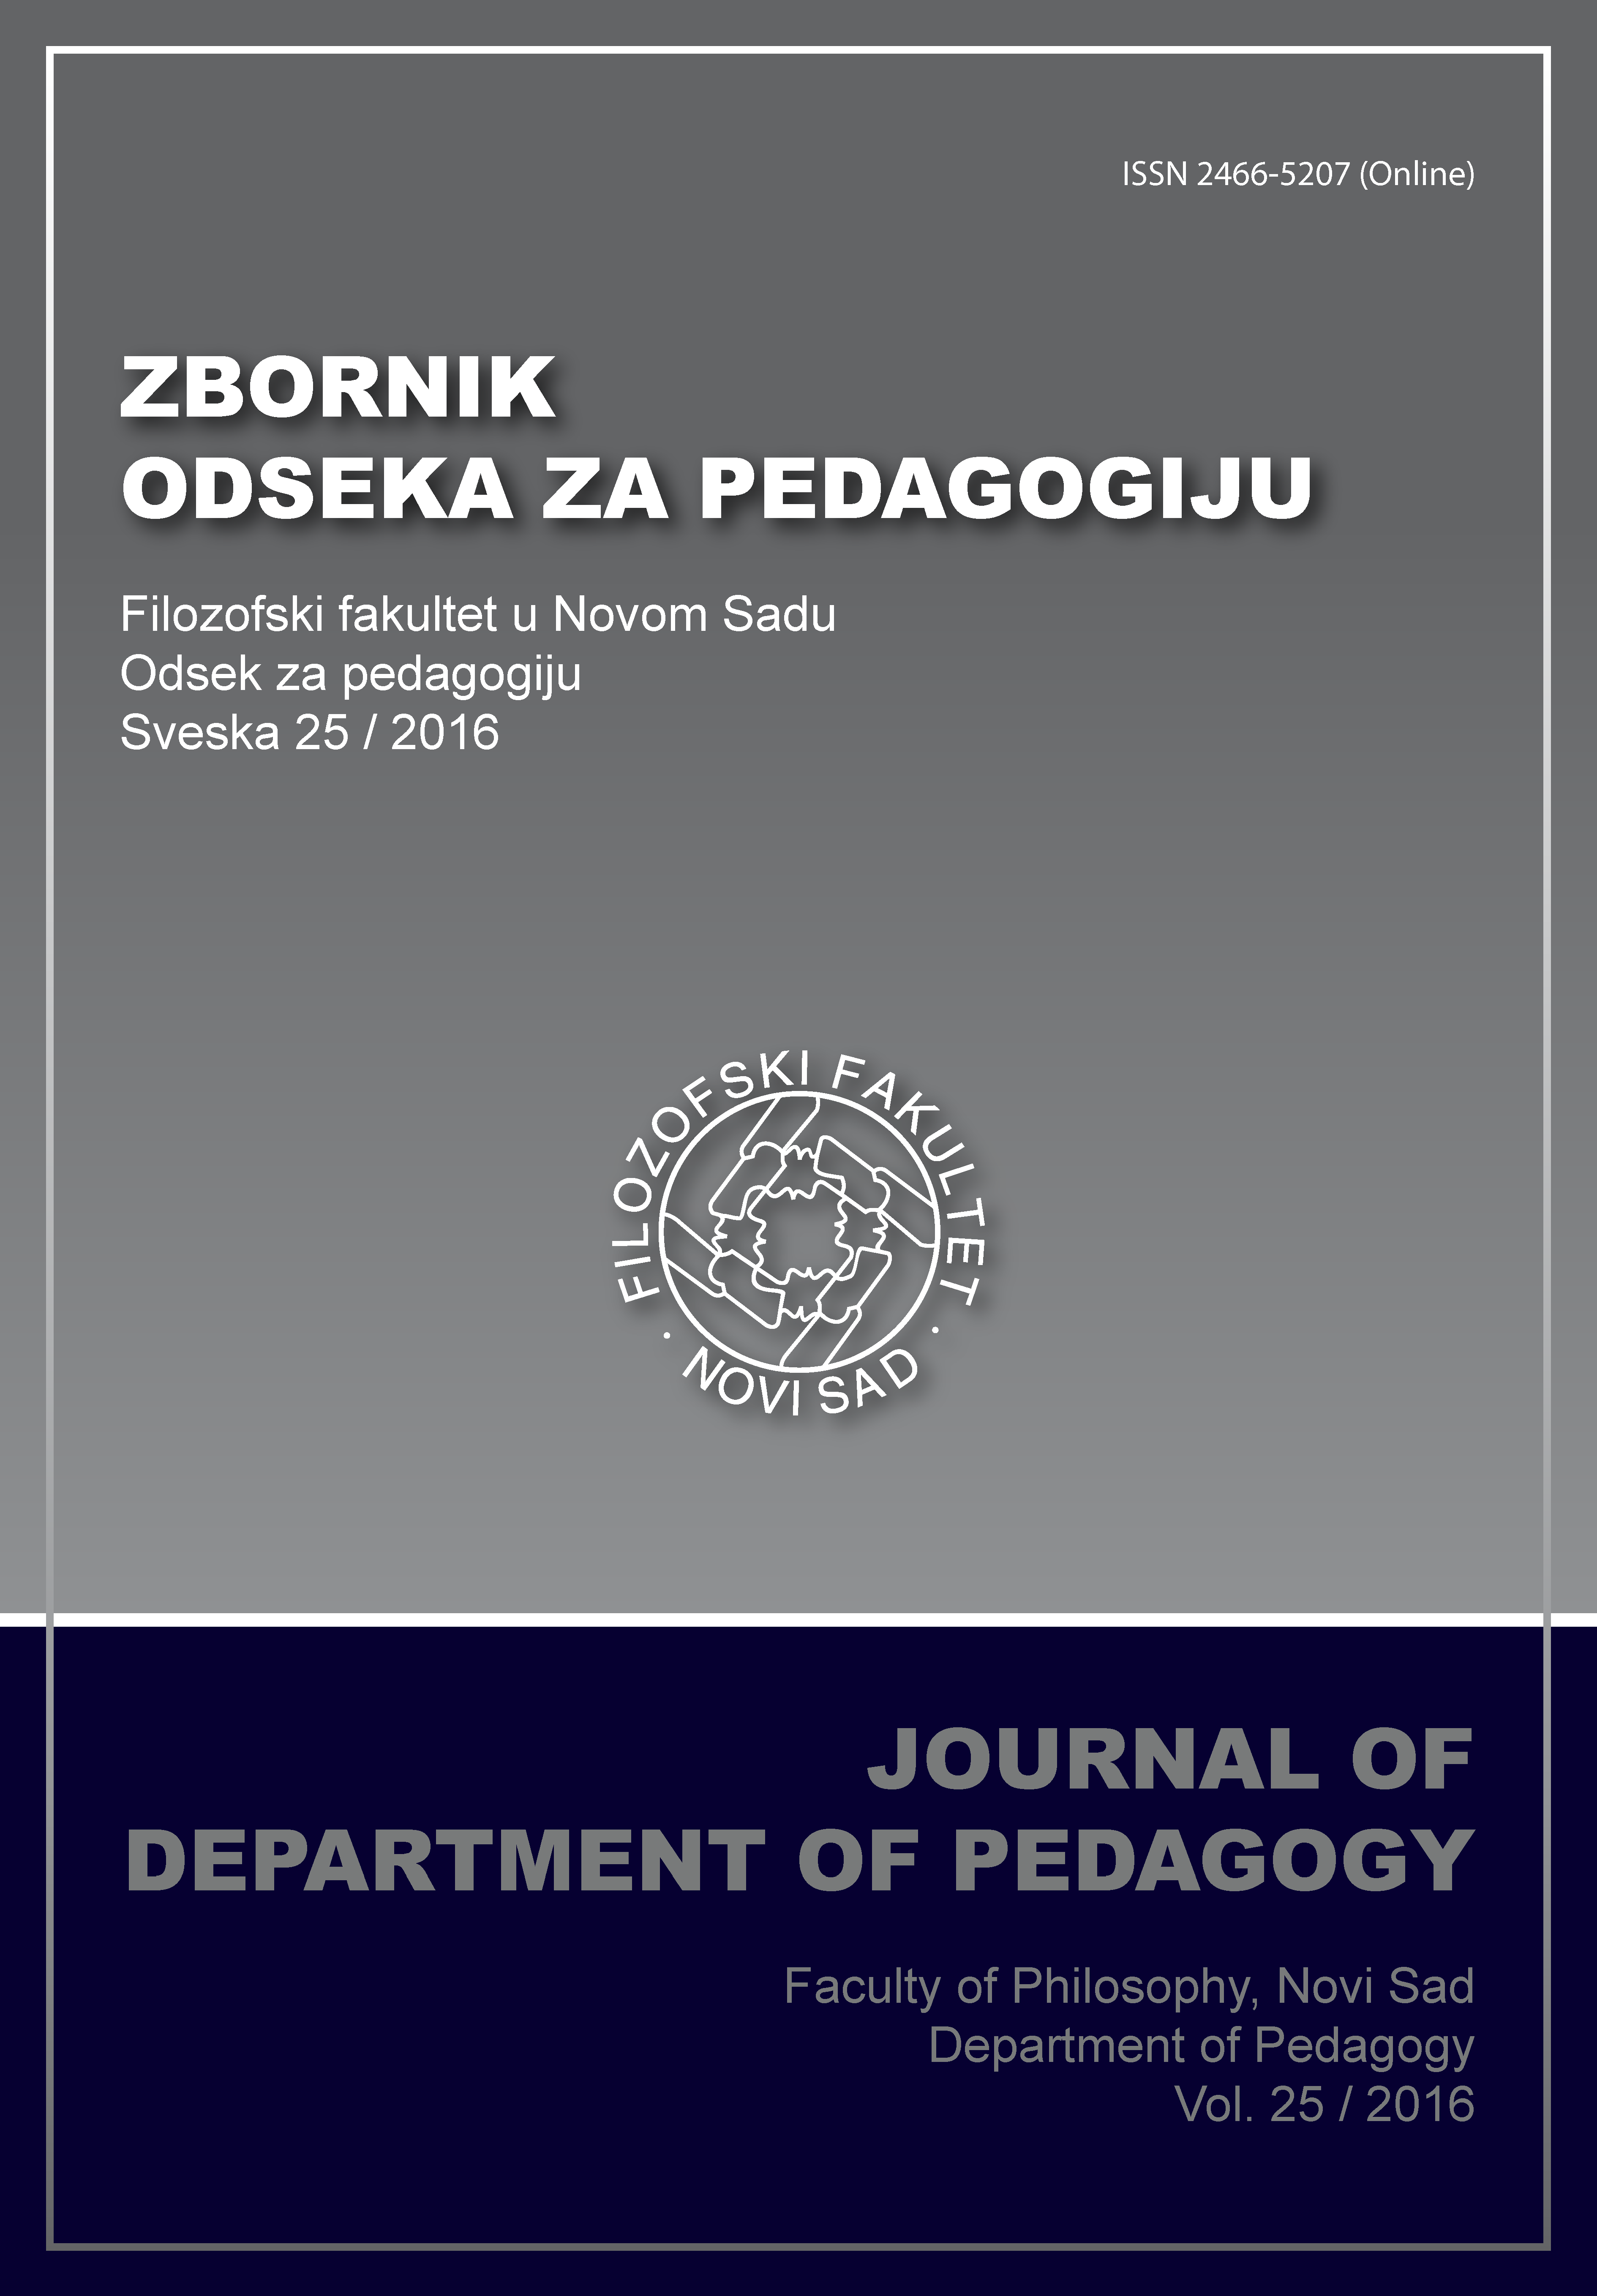 Journal of Department of Pedagogy Cover Image